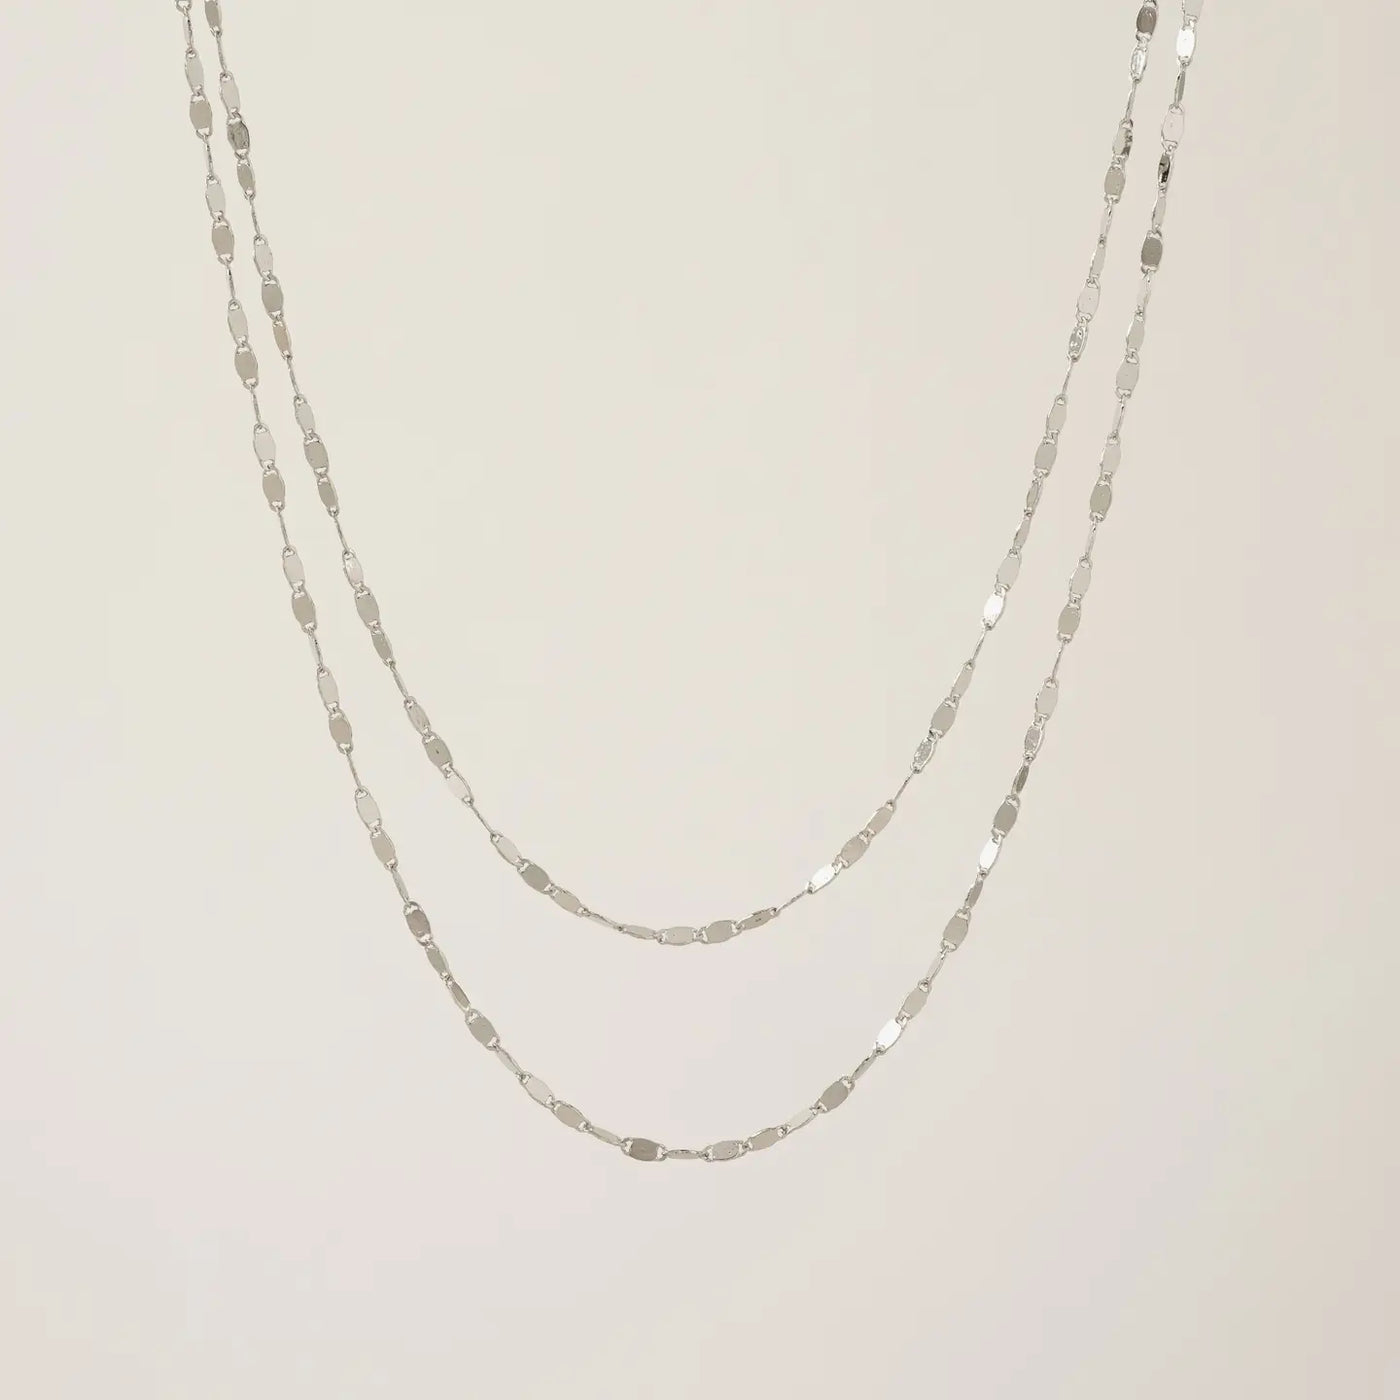 Cleo Layered Necklace in Silver